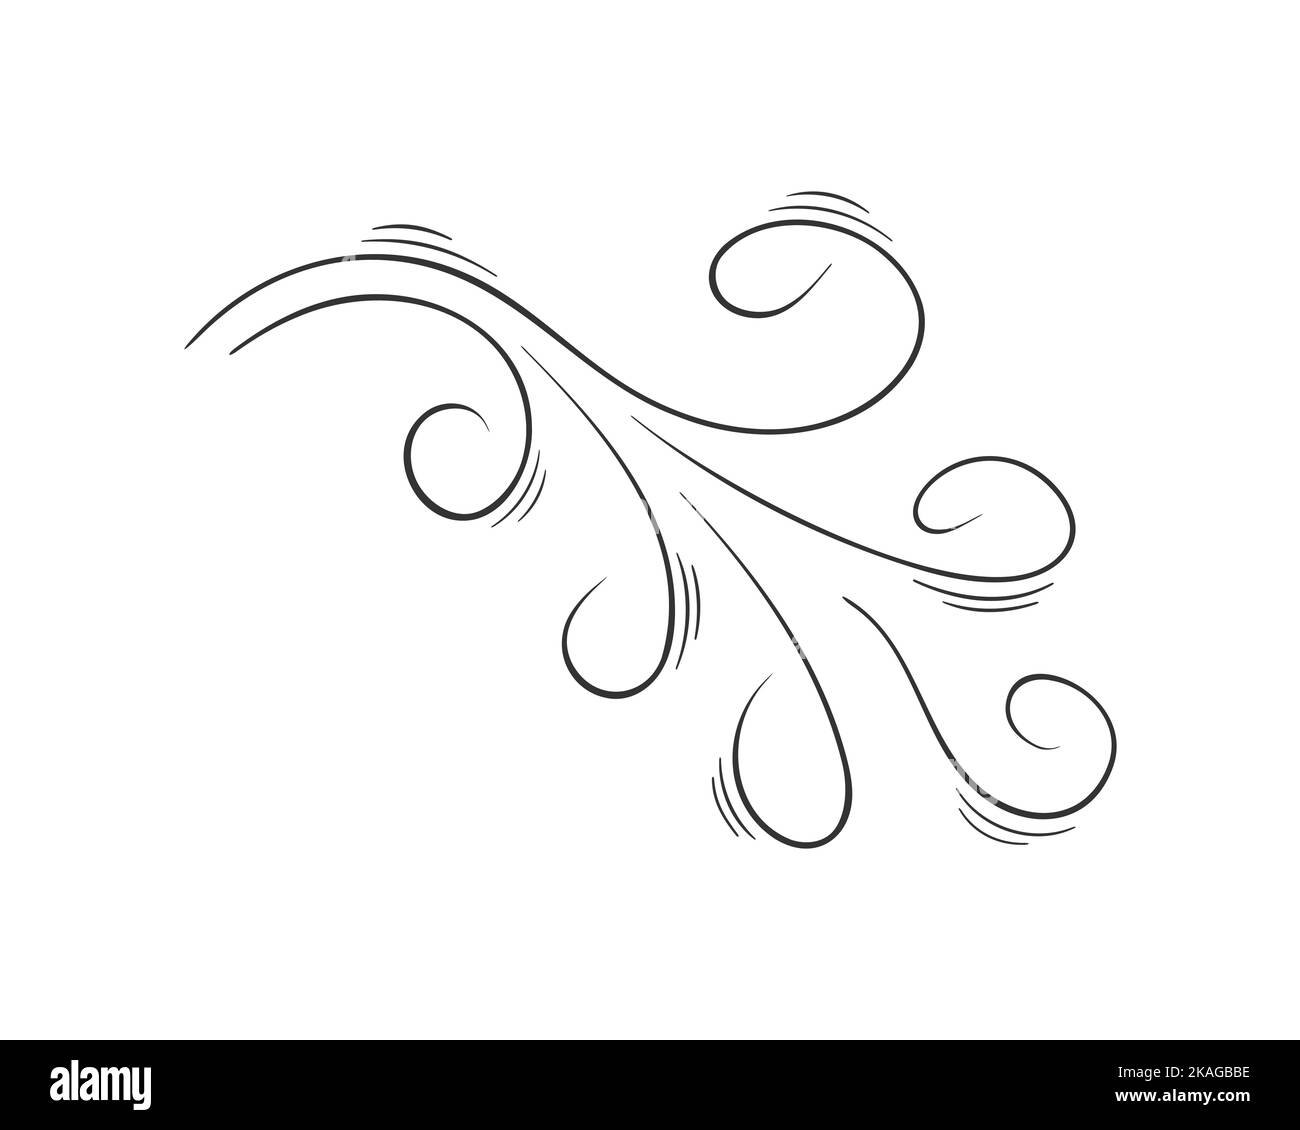 Hand drawn swirls icon. Air flow or wind blow effect in doodle style. Sketch of gust, smoke, dust isolated on white background. Vector linear illustration. Stock Vector